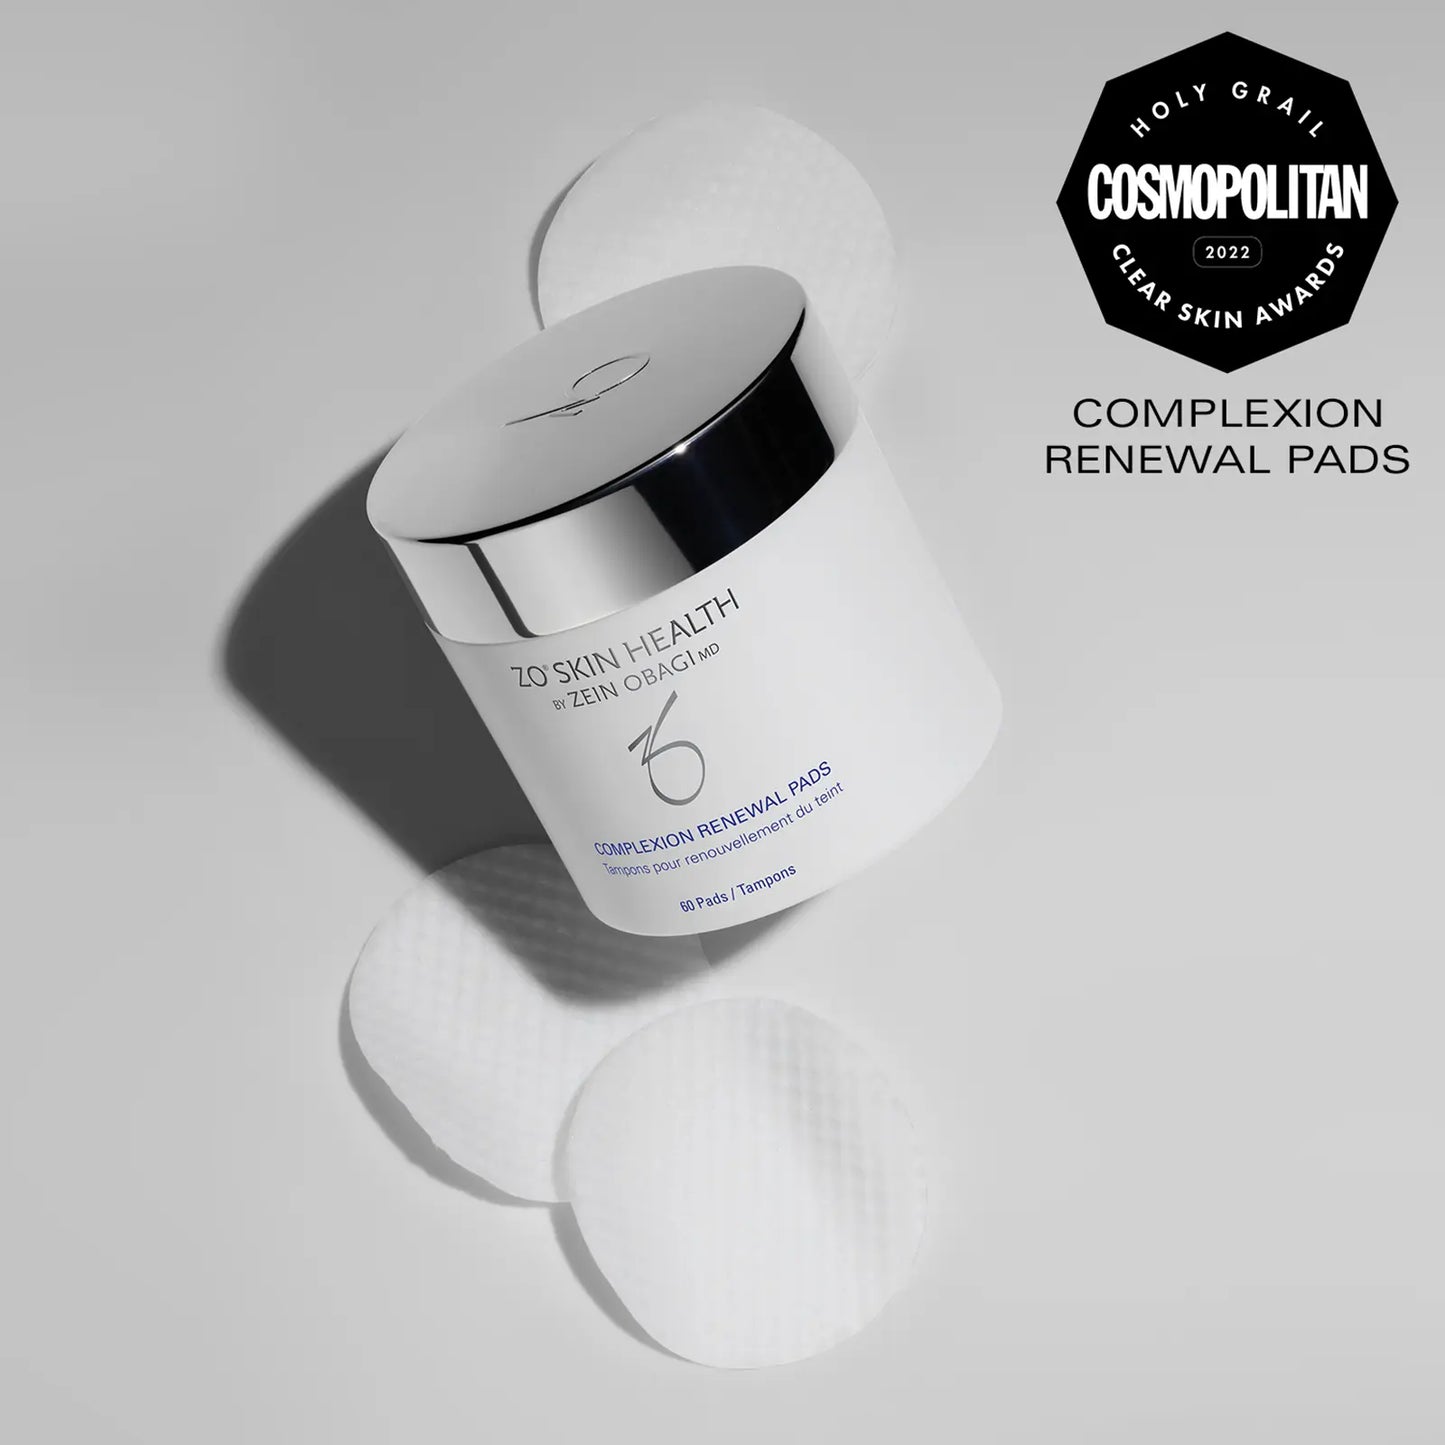 ZO Skin Health Complexion Renewal Pads 60 pads